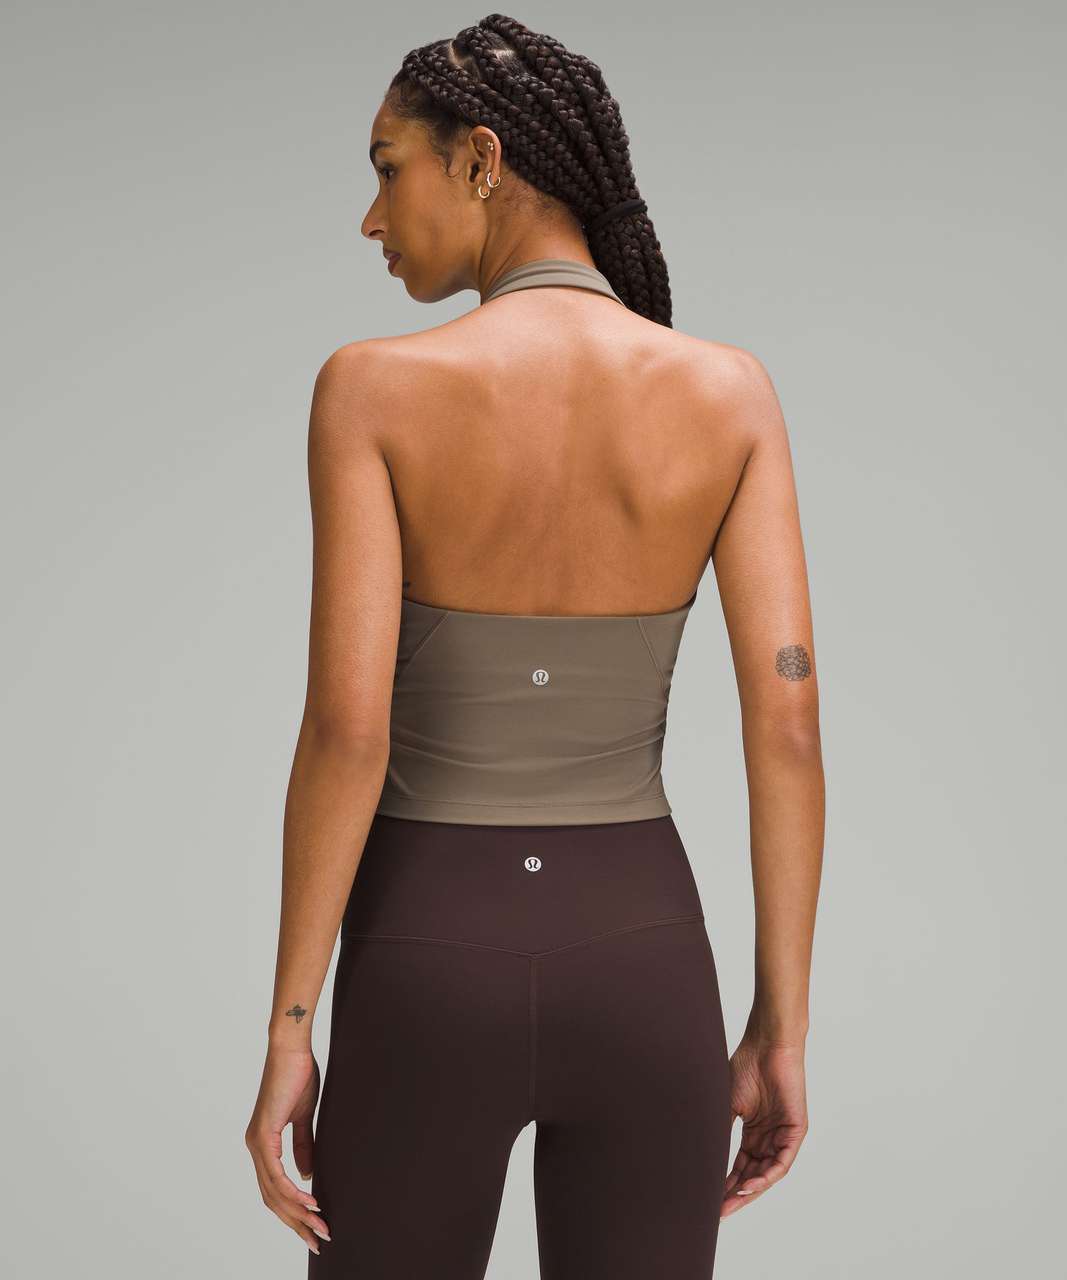 Lululemon Align™ Cropped Tank Top - Size 2 - Roasted Brown RTDB - NWT